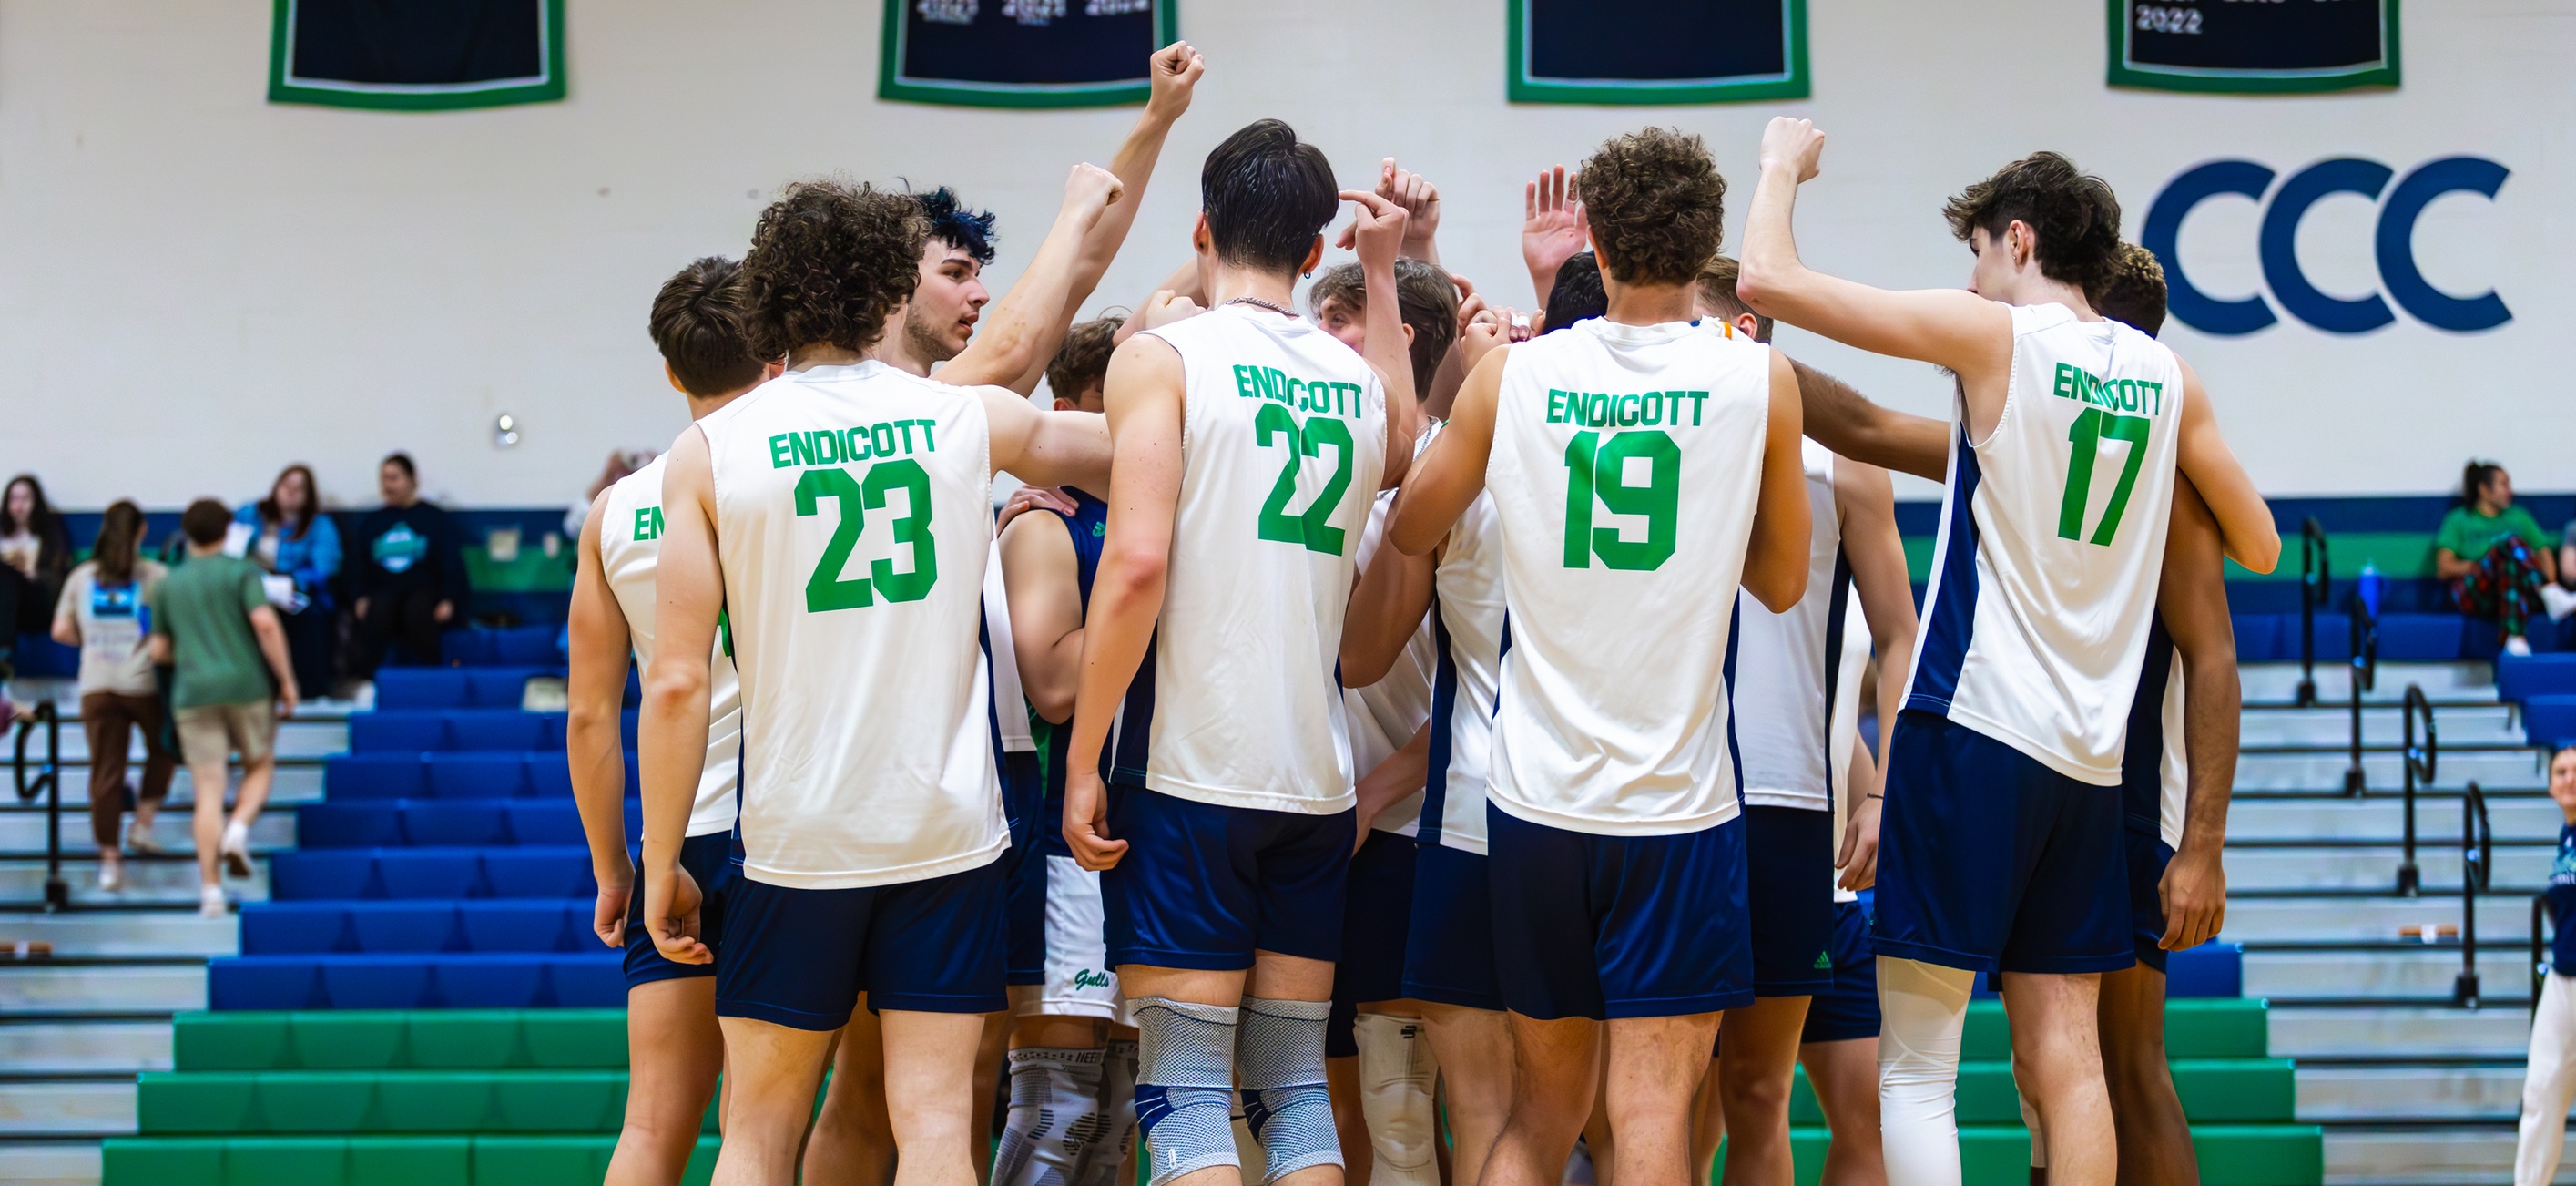 Men’s Volleyball Bows Out In NEVC Semifinals To Eastern Nazarene, 3-1